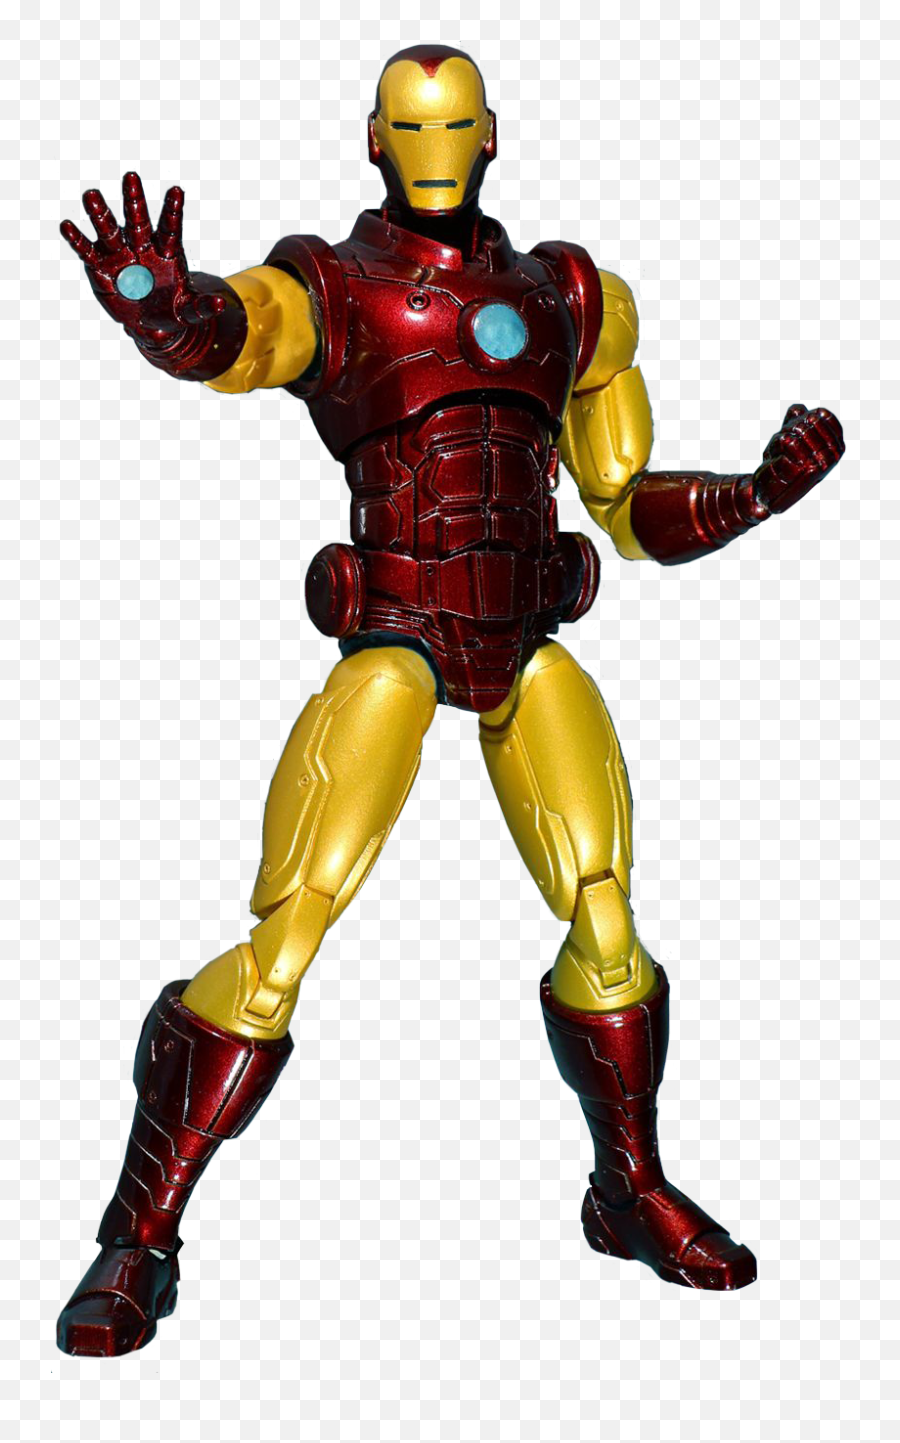 Download Iron Man One - Iron Man Png Image With No Iron Man Mezco,Marvel Legends Icon Action Figures